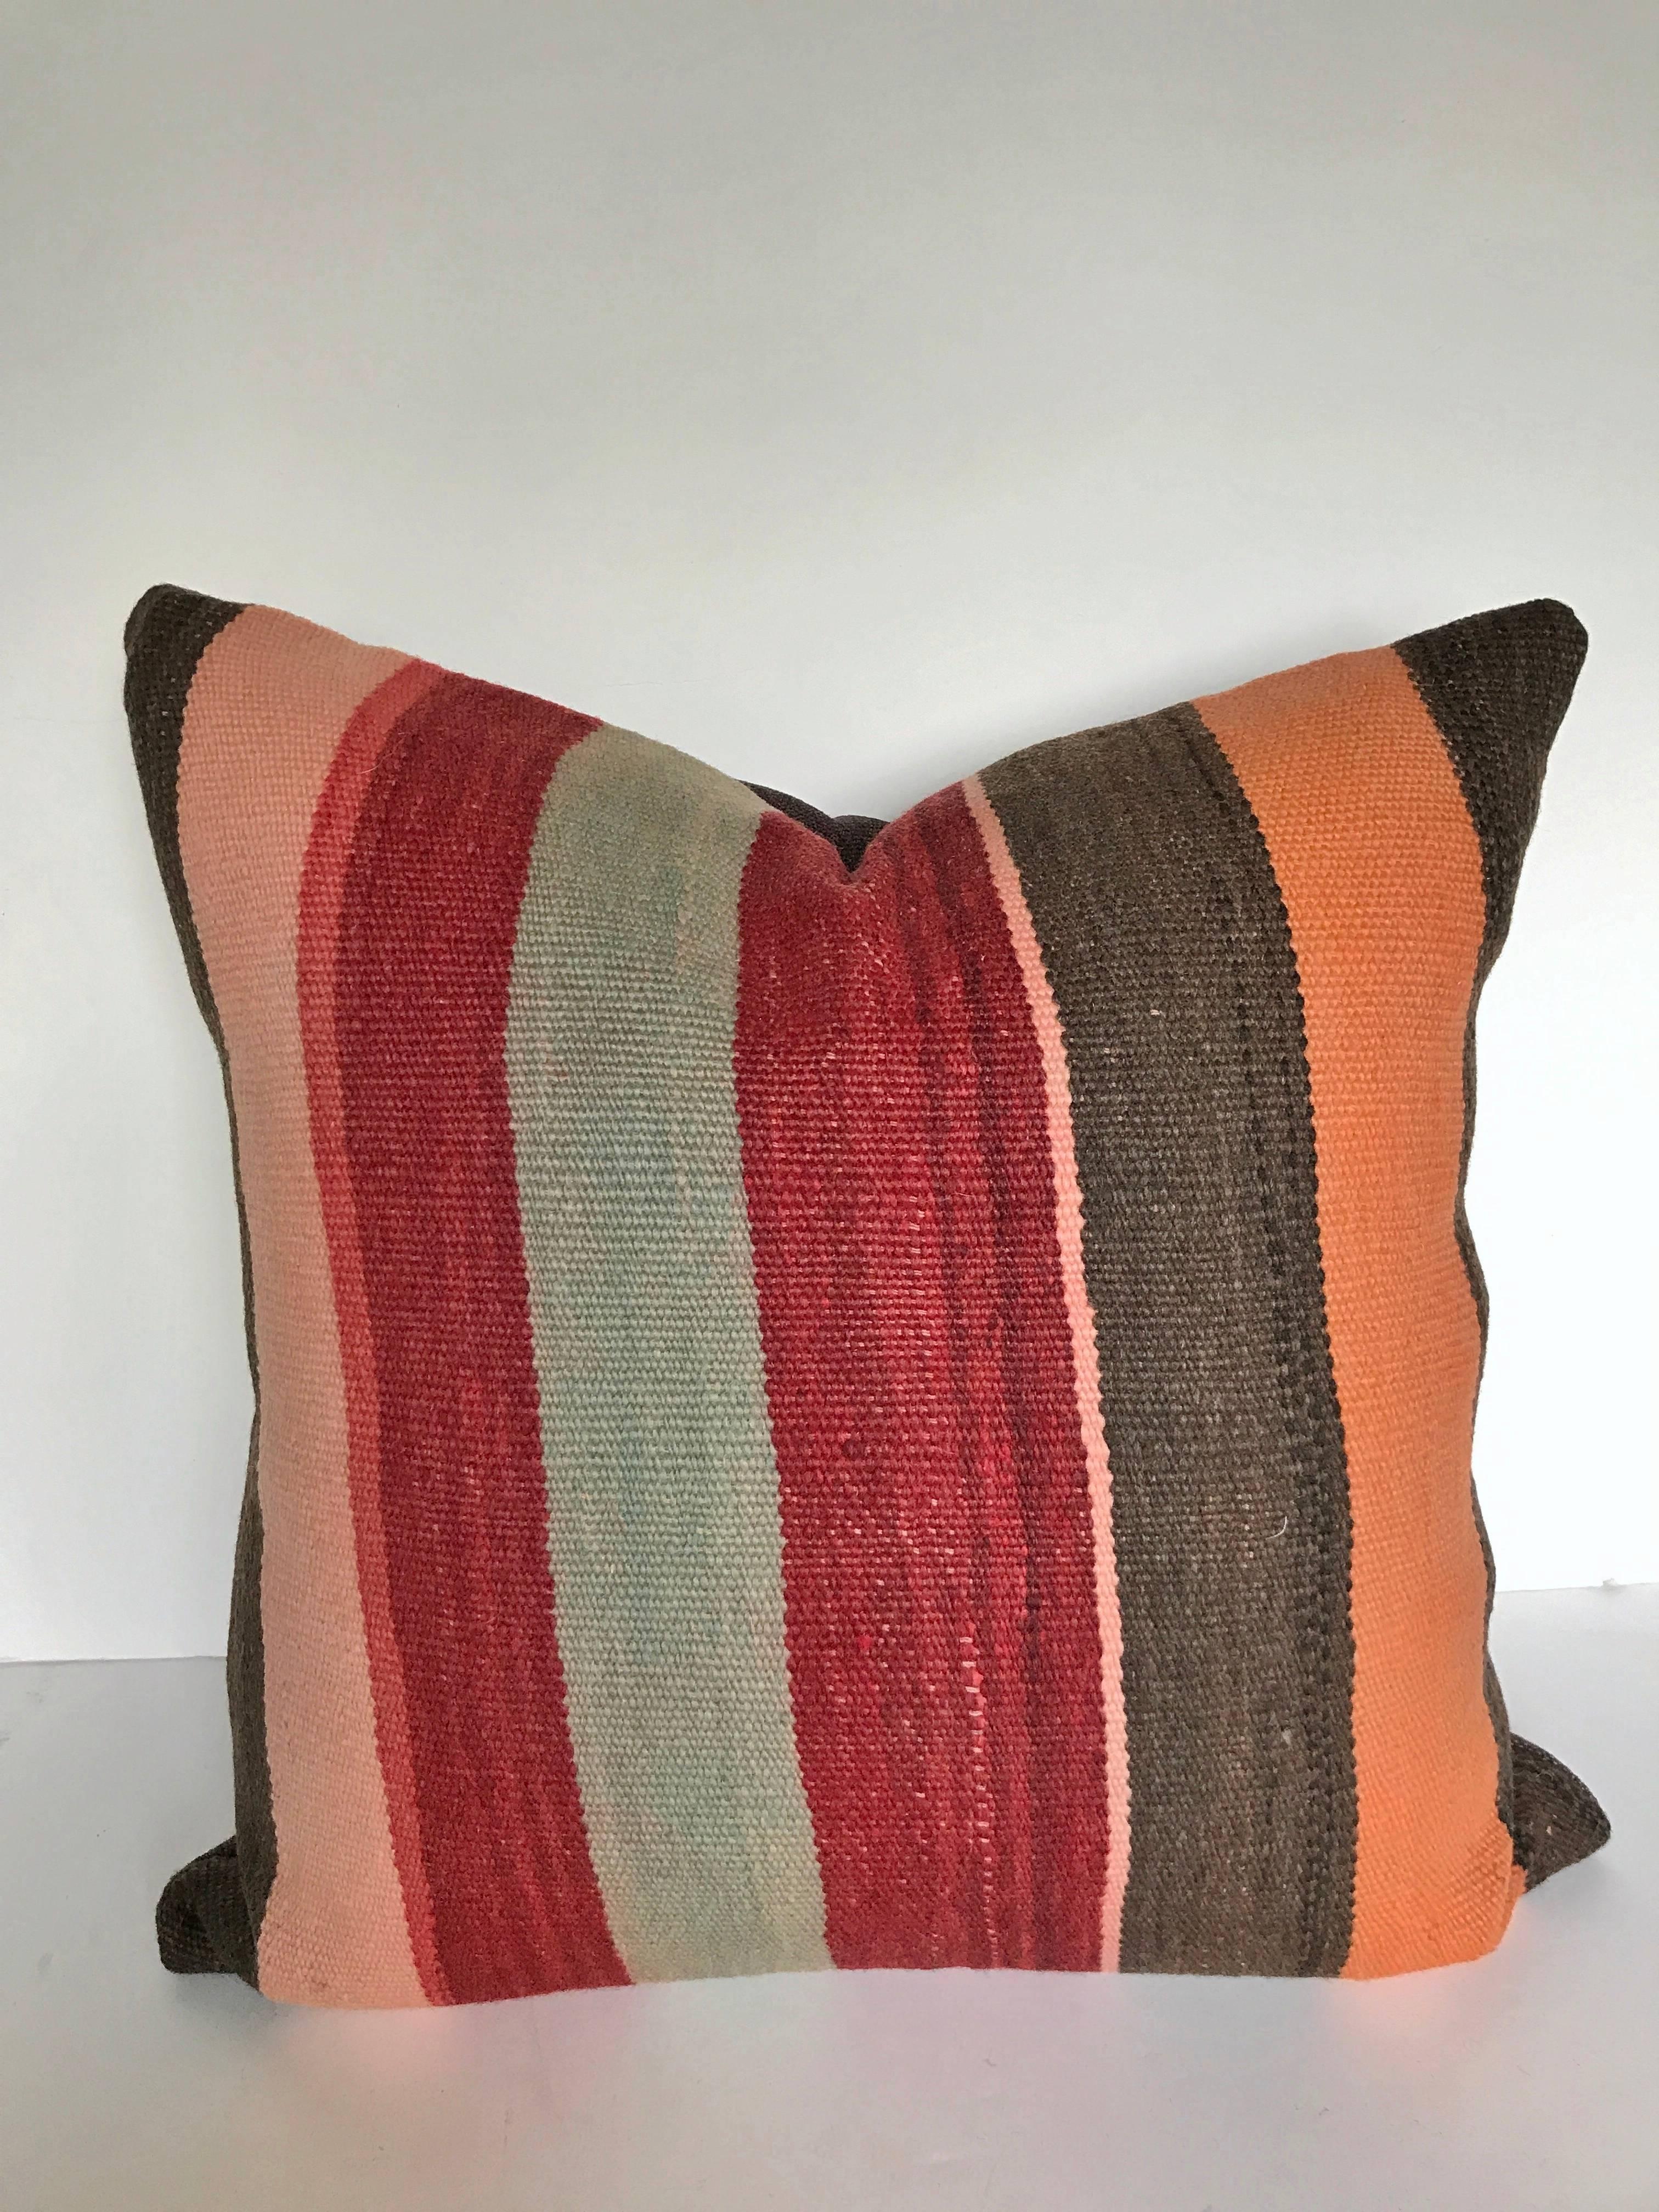 Custom pillow cut from a vintage hand loomed wool Moroccan rug made by the Berber women of the Atlas Mountains. Wool is soft and lustrous with natural dyes. Pillow is backed in a dark brown linen blend, filled with an insert of 50/50 down and